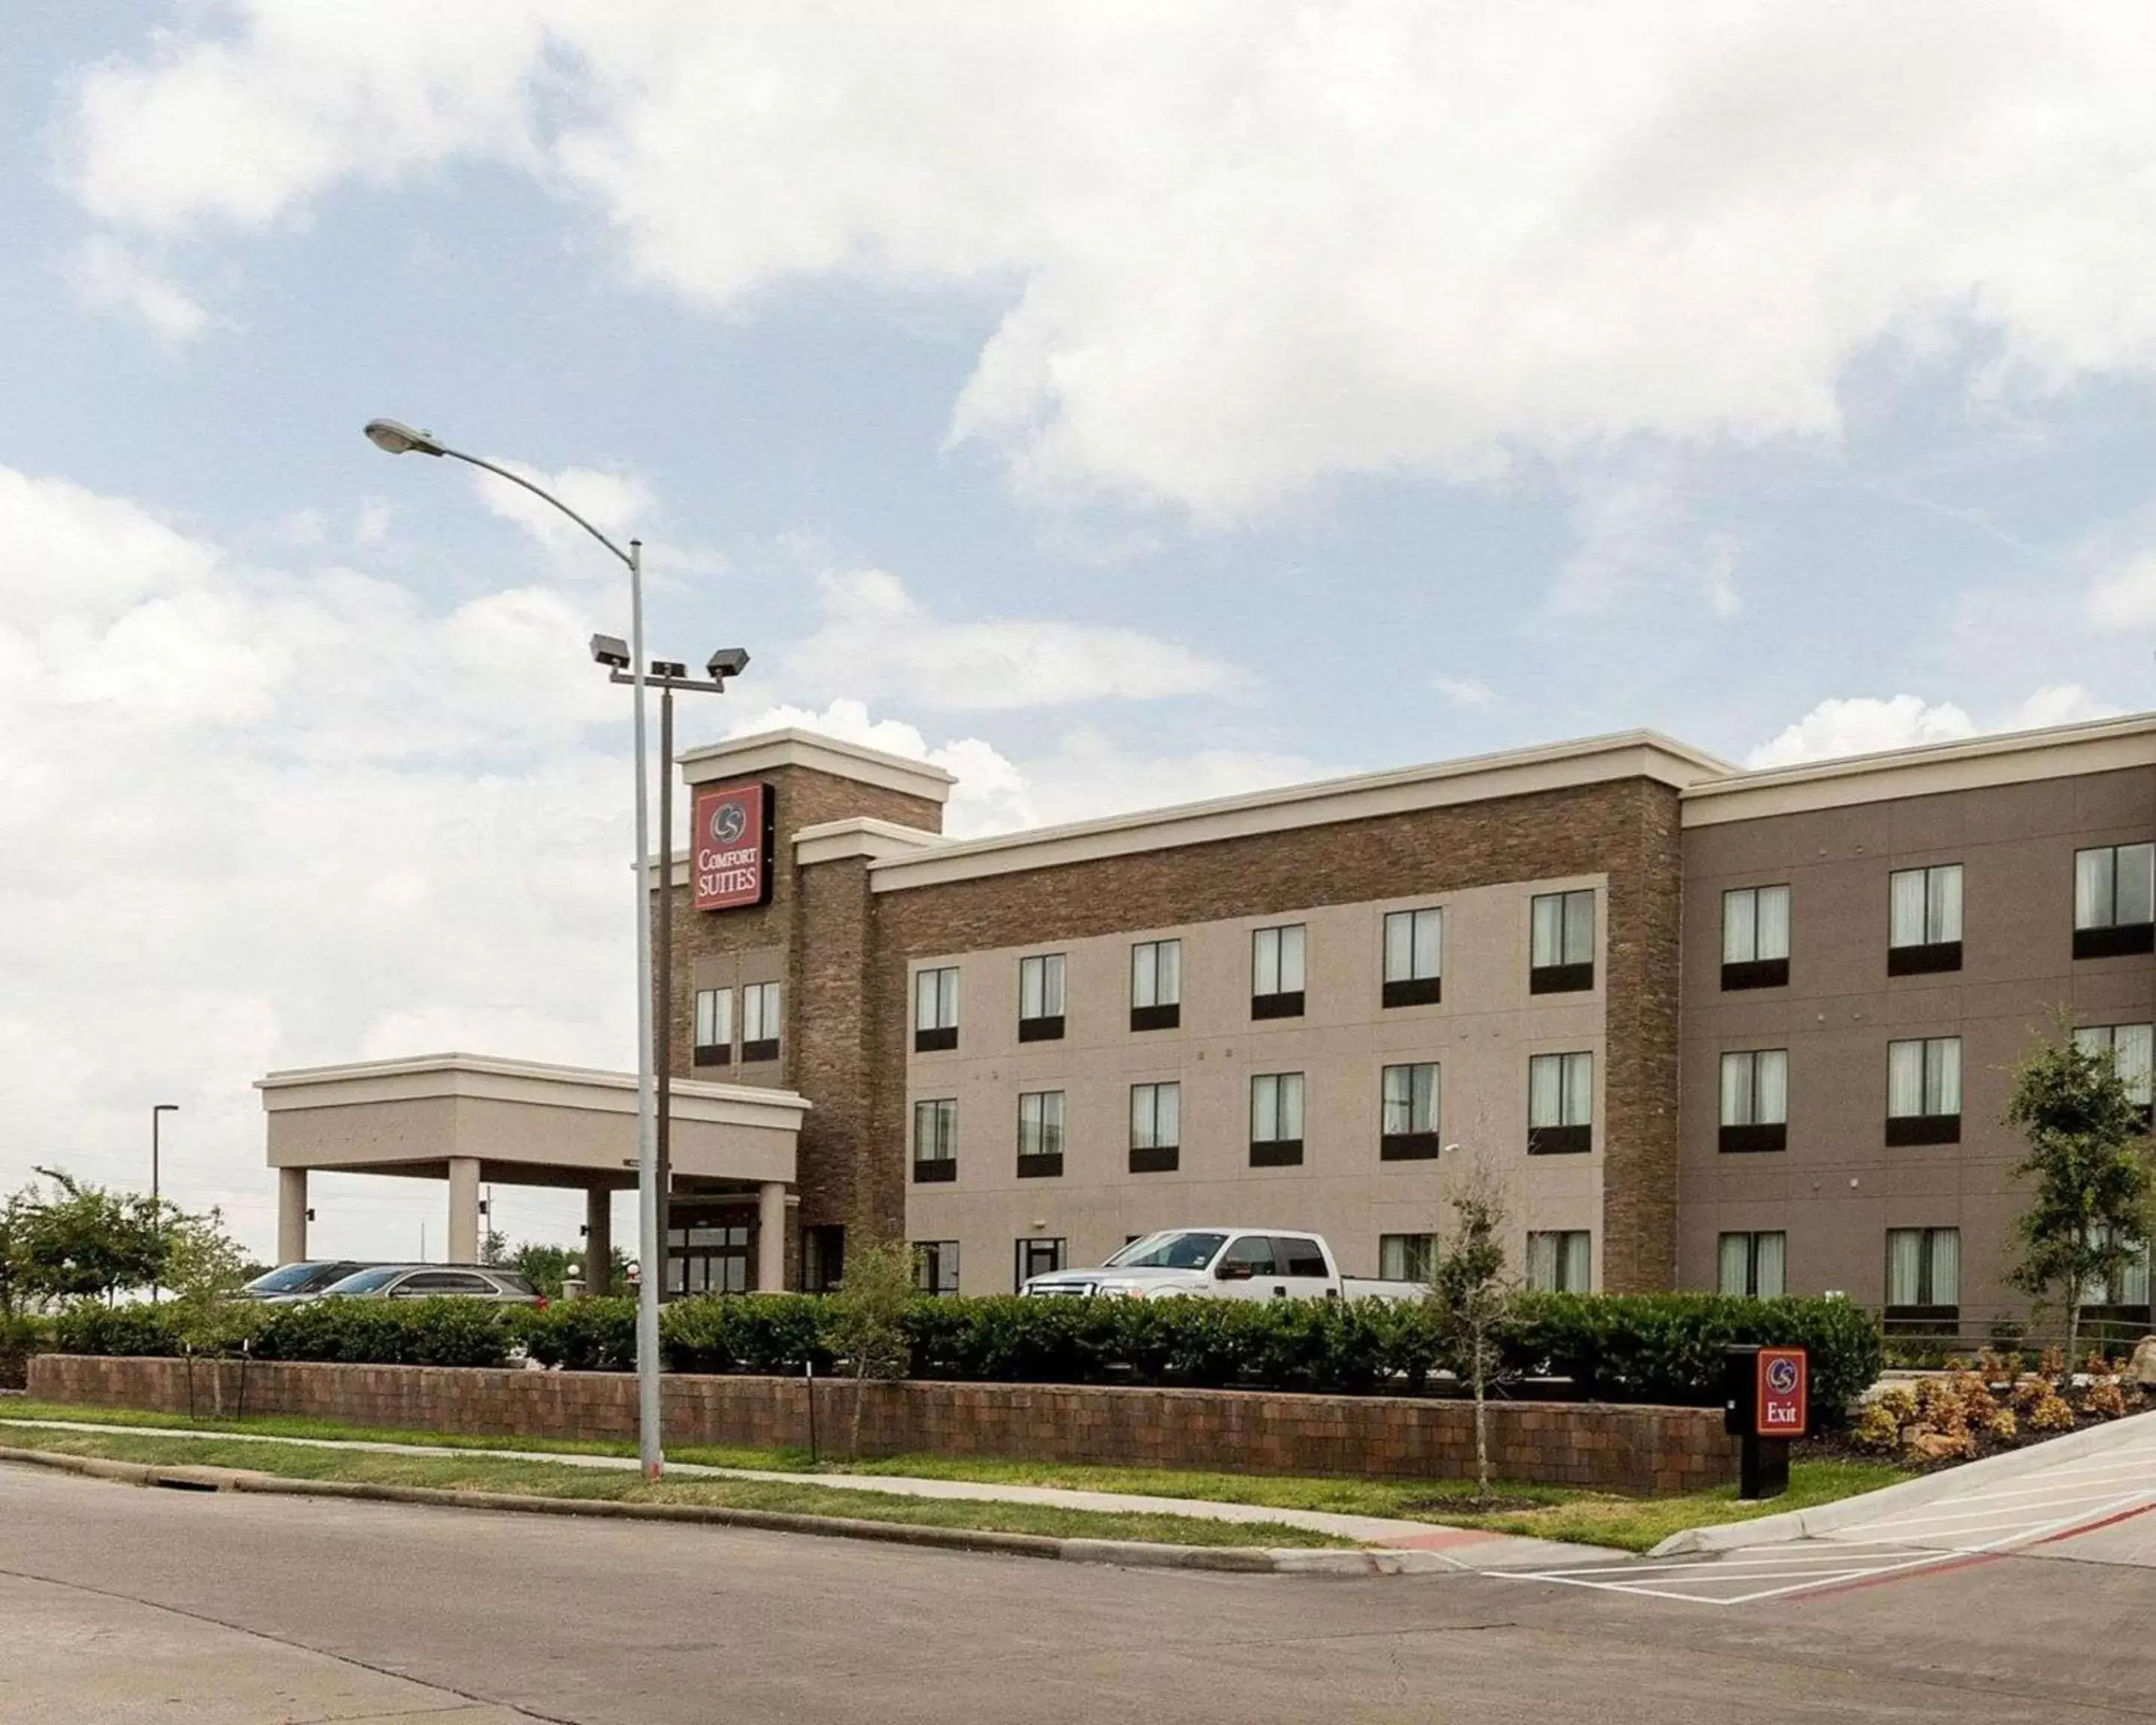 Property Building in Comfort Suites near Westchase on Beltway 8